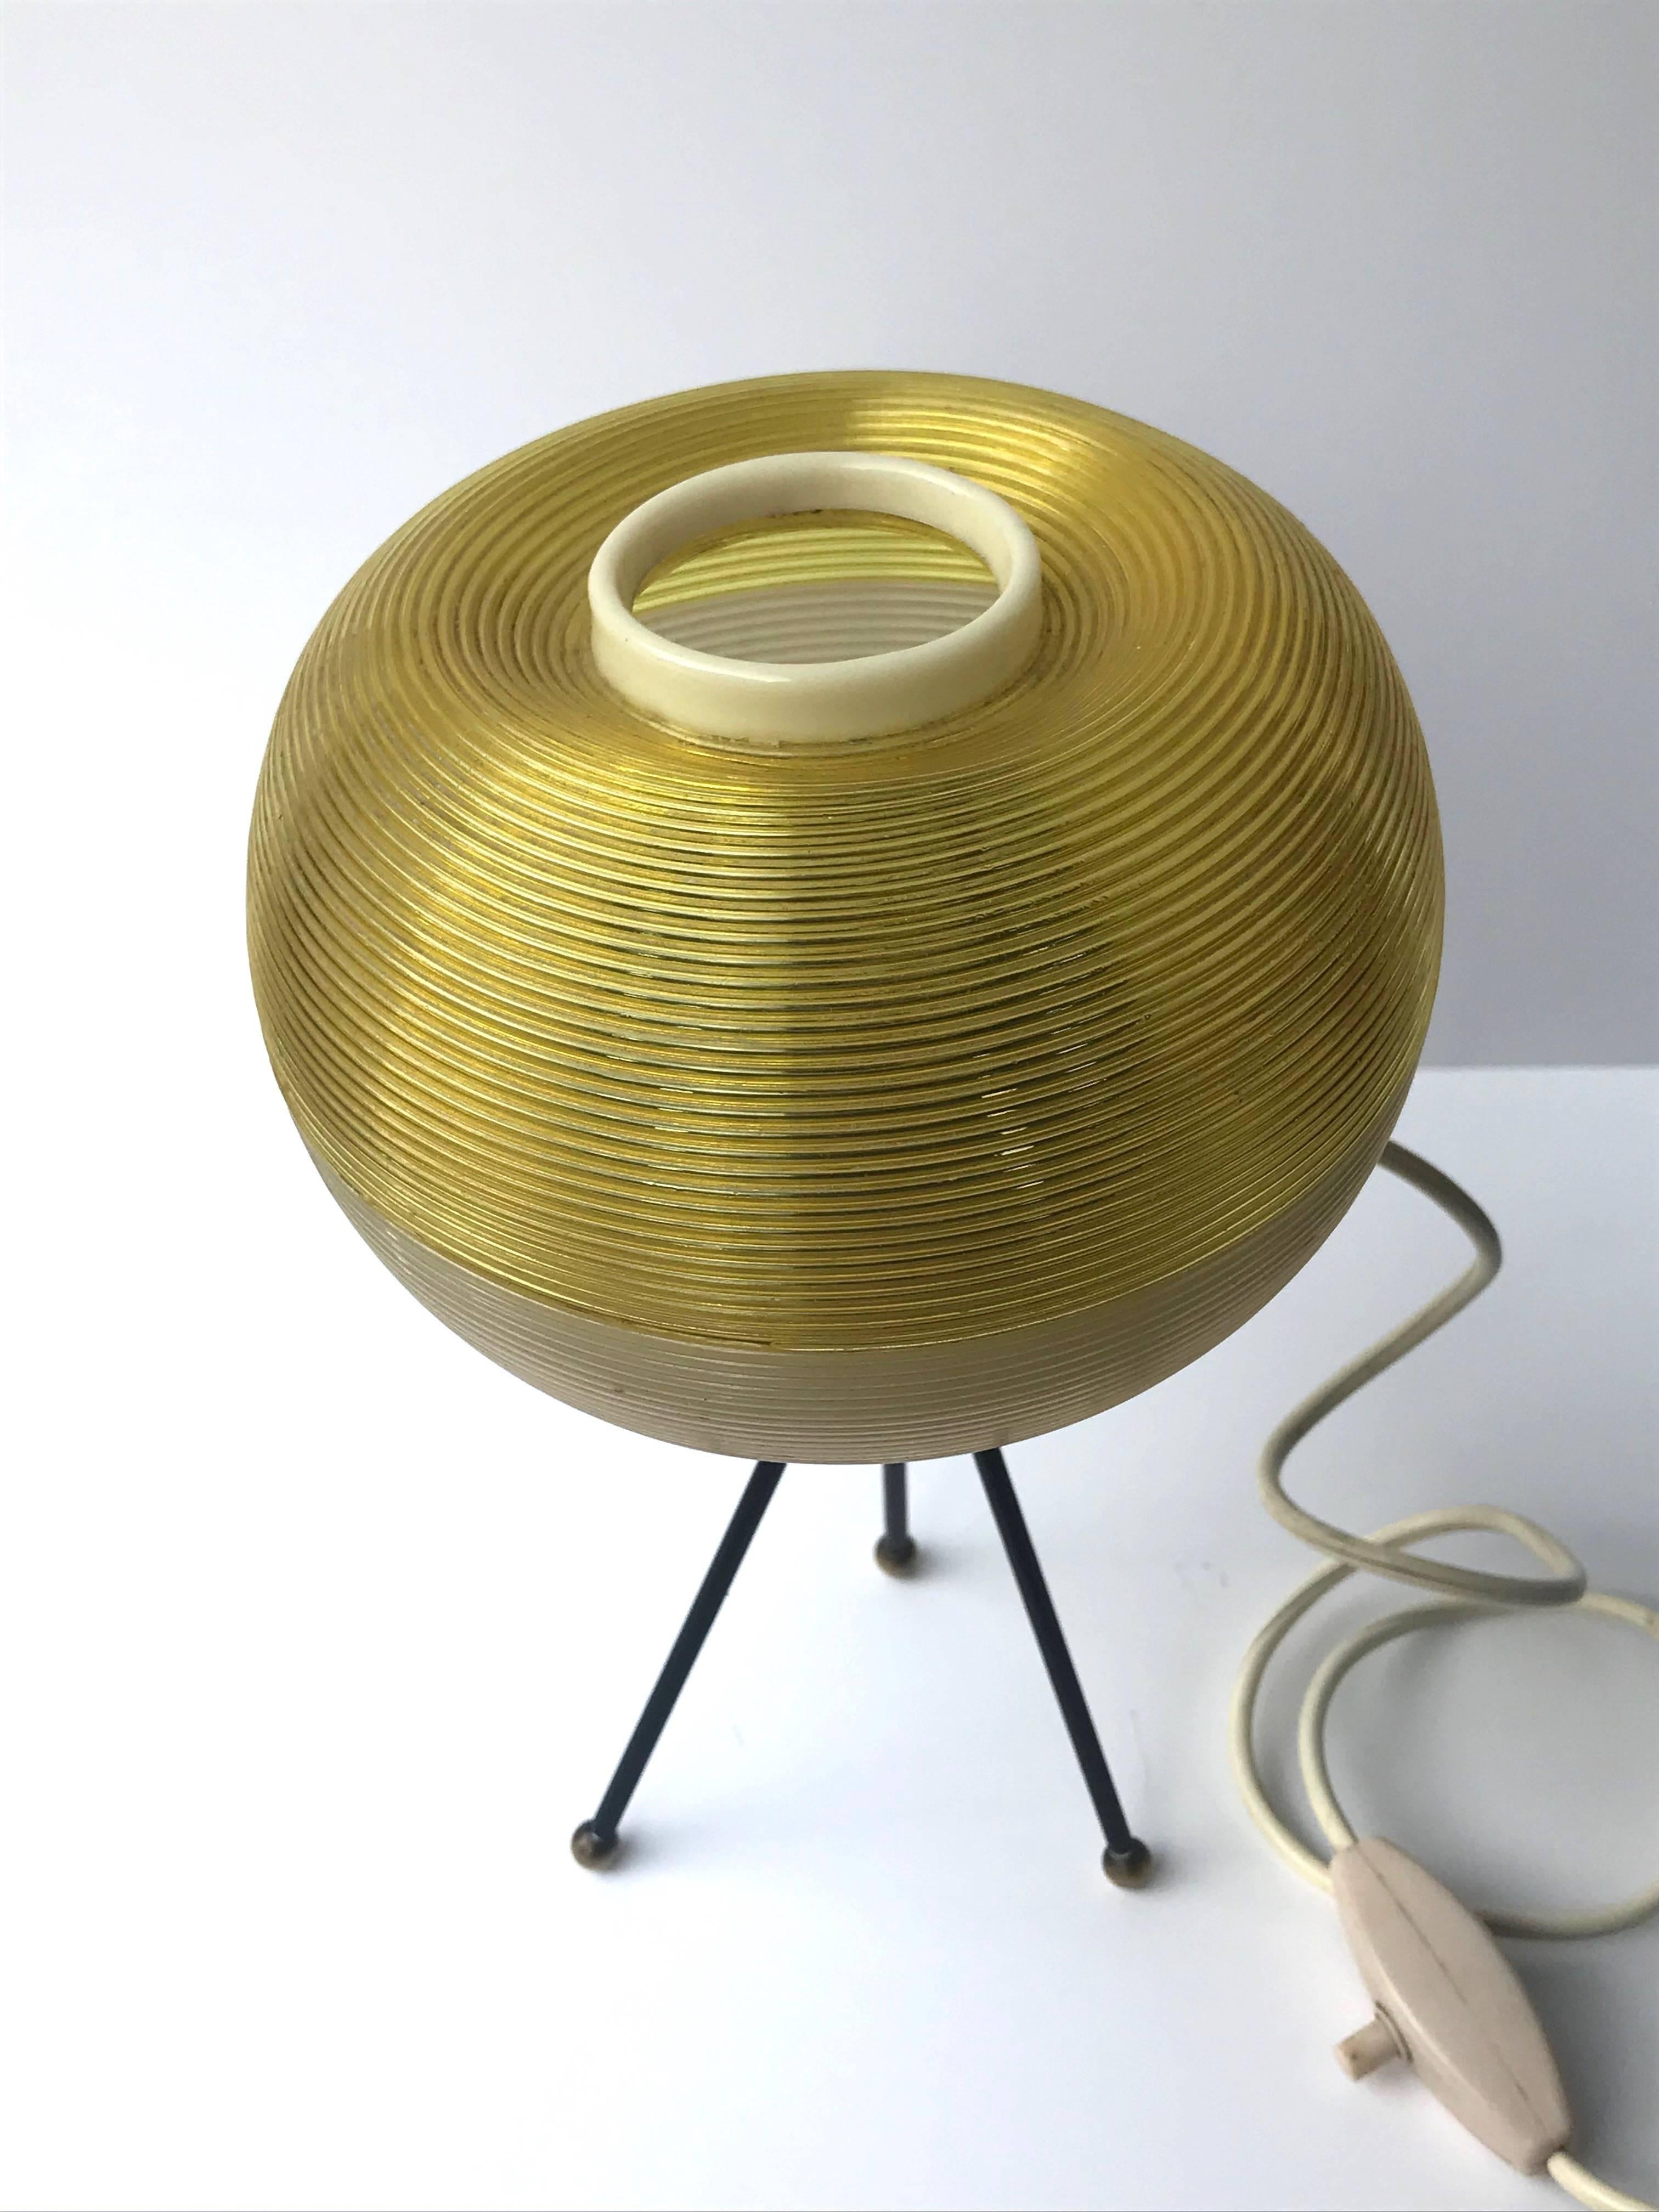 Very rare lamp design of the years 50.
Creator Pierre Guariche (1926-1995),
Editor: Disderot
Tripoded black metal lacquer base on brass balls
Supporting a bicolor rotaflex diffuser.
Socket screw e27. Push-button switch.
Bibliography: The